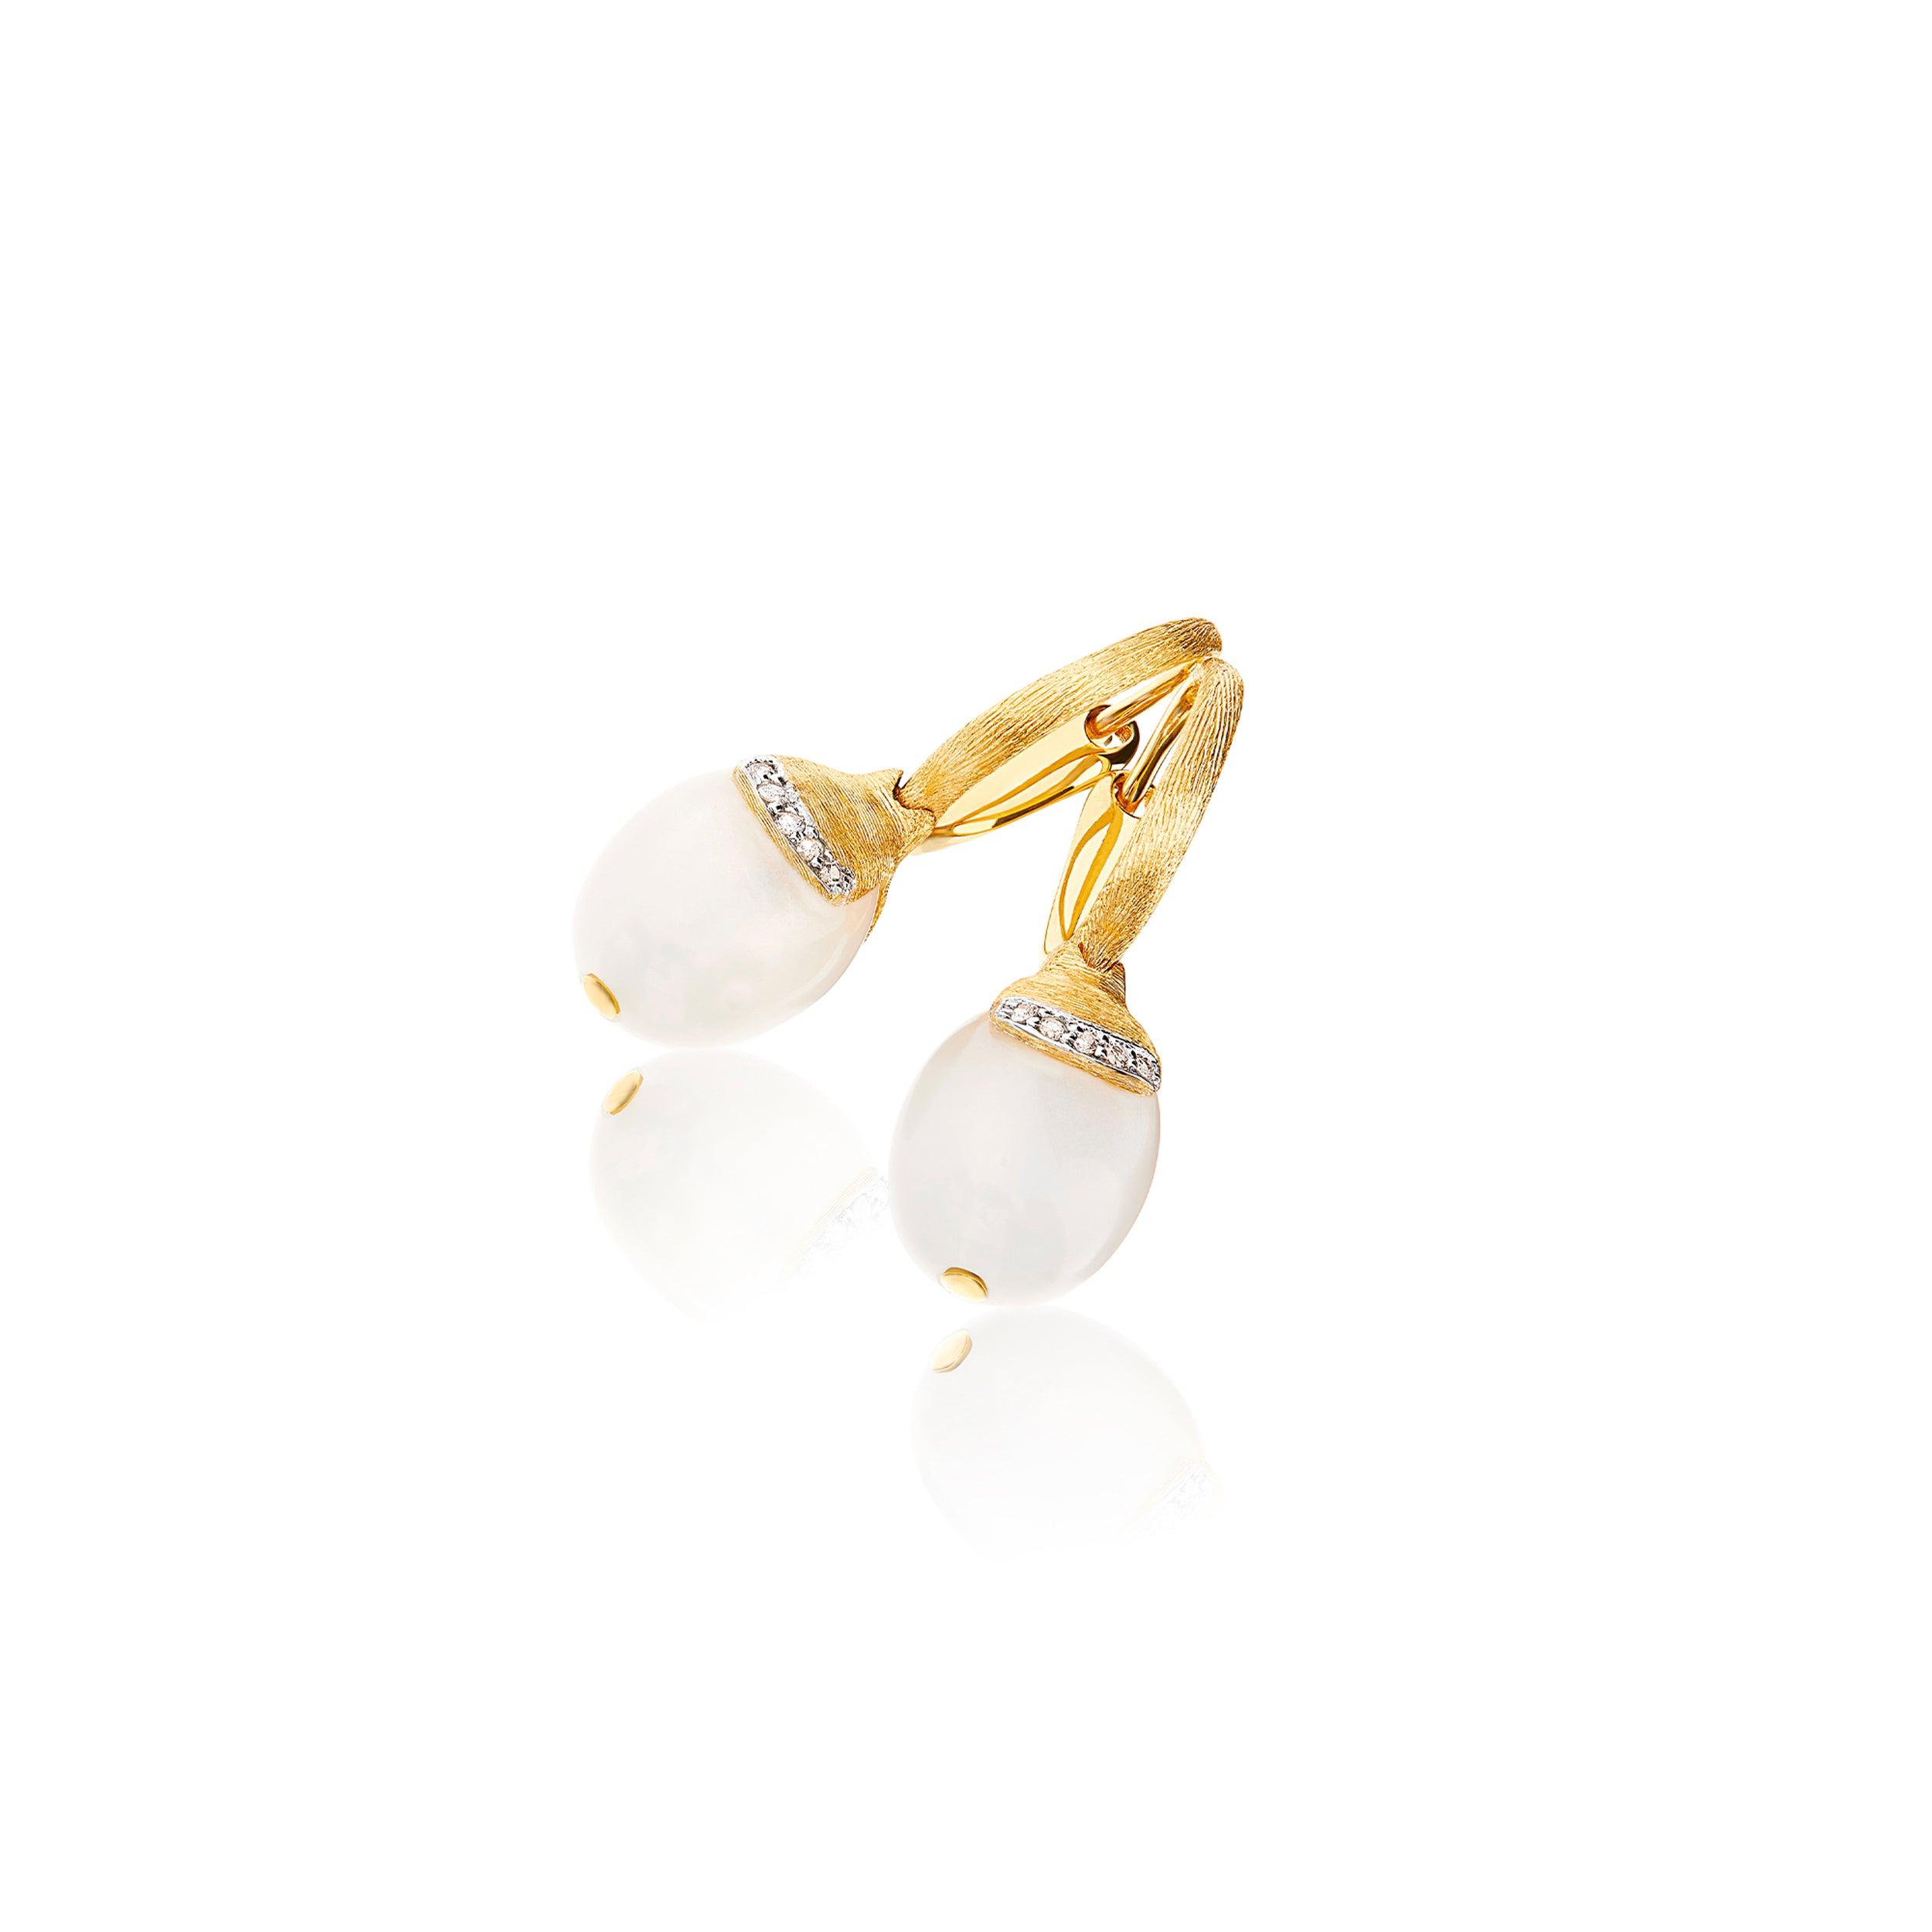 WHITE DESERT "AMULETS" CILIEGINE GOLD AND WHITE MOONSTONE EARRINGS WITH DIAMONDS (SMALL) - Brunott Juwelier